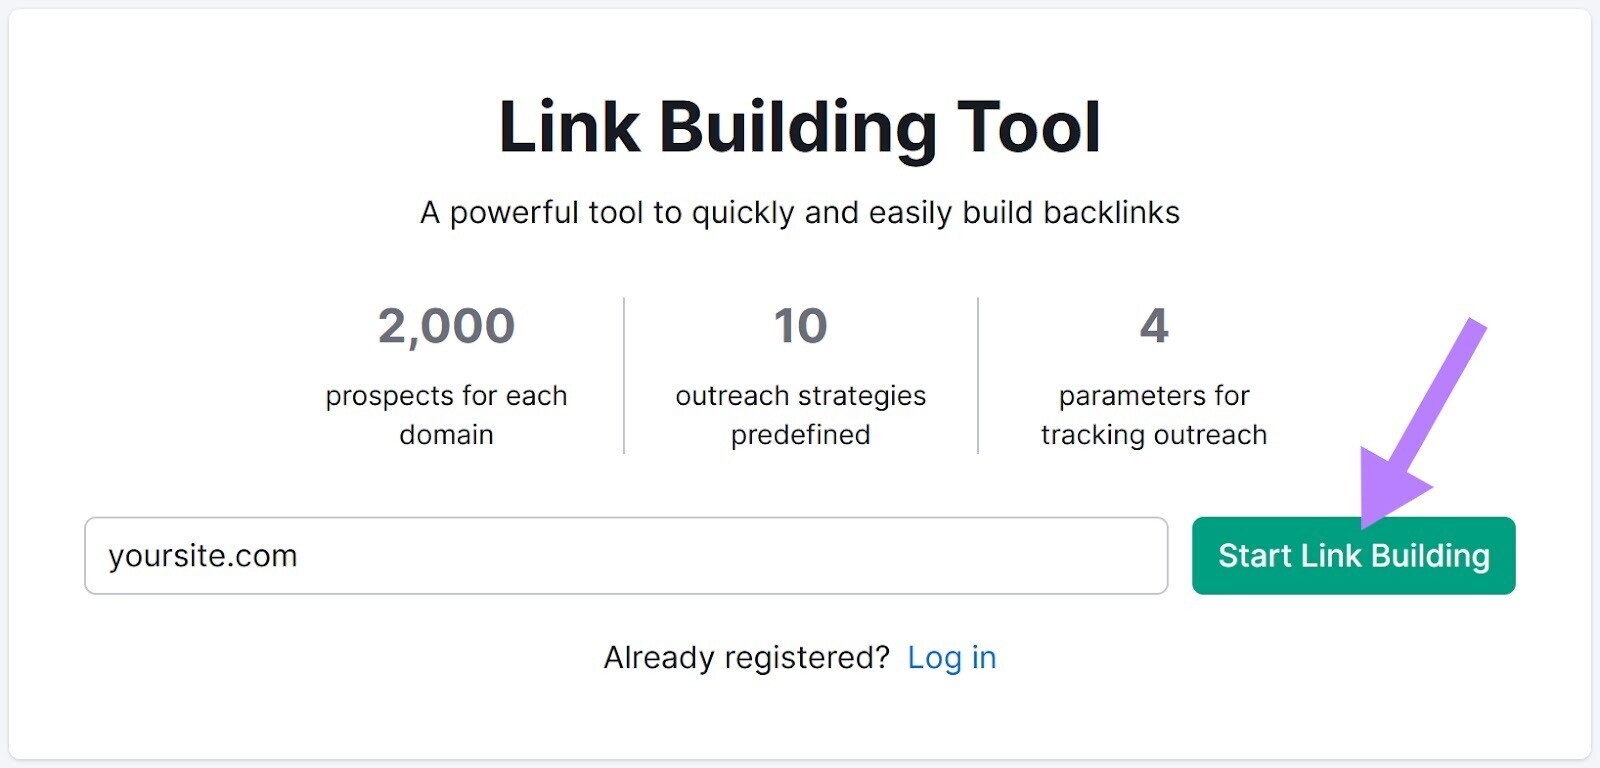 screenshot of Link Building Tool search bar with “Start Link Building” button